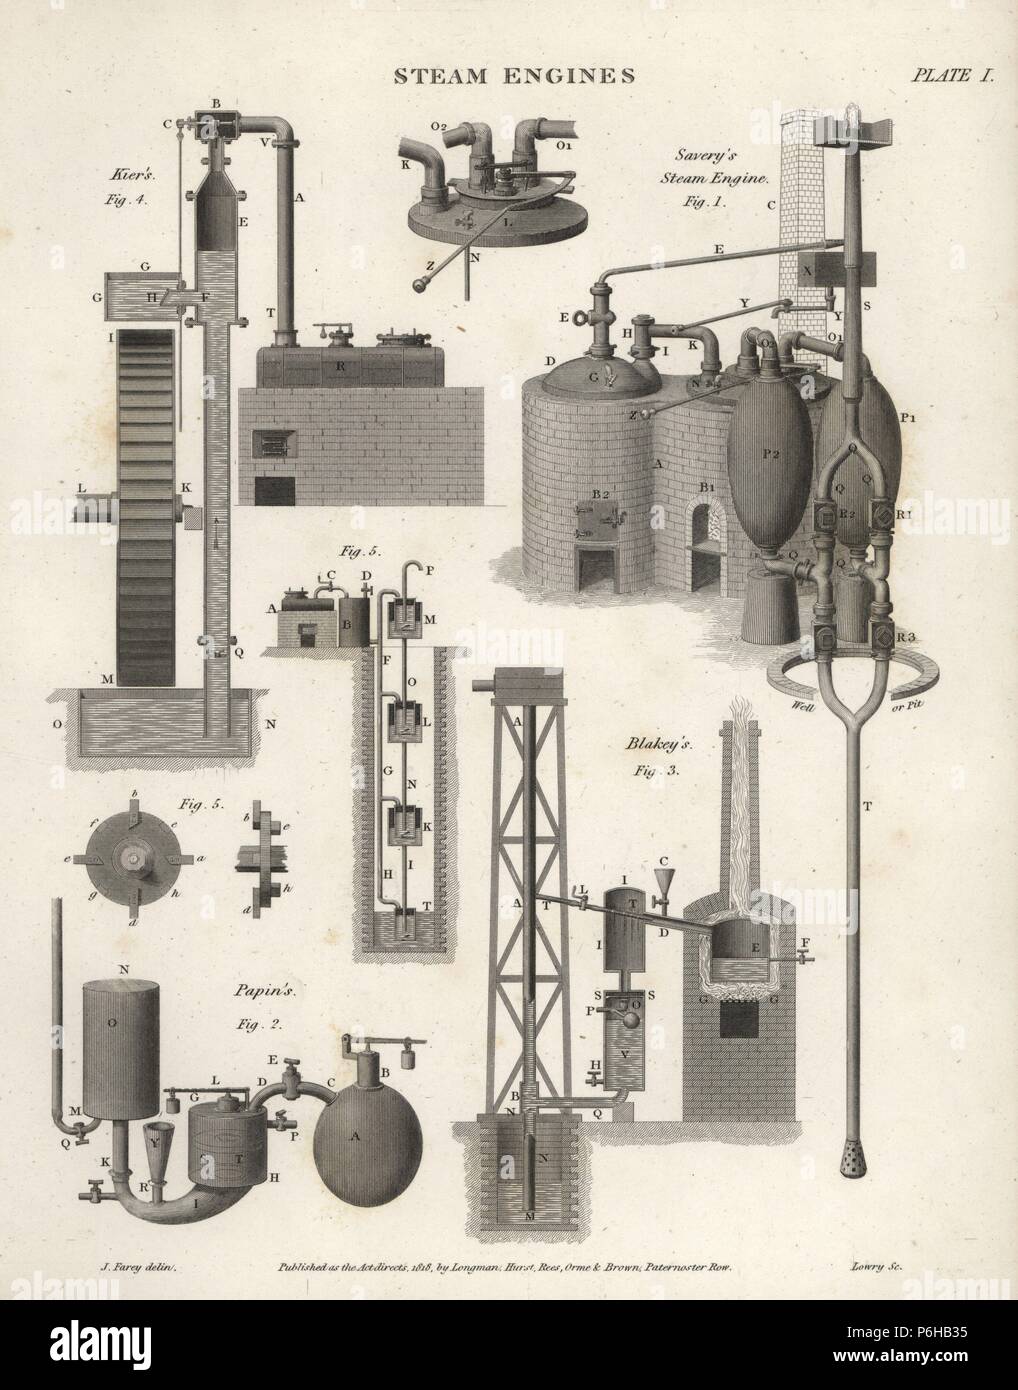 Steam engines by Thomas Savery, William Blakey, Mr Kier, and Denis Papin, 17th and 18th centuries. Copperplate engraving by Wilson Lowry after an Illustration by J. Britton from Abraham Rees' 'Cyclopedia or Universal Dictionary,' London, 1818. Stock Photo